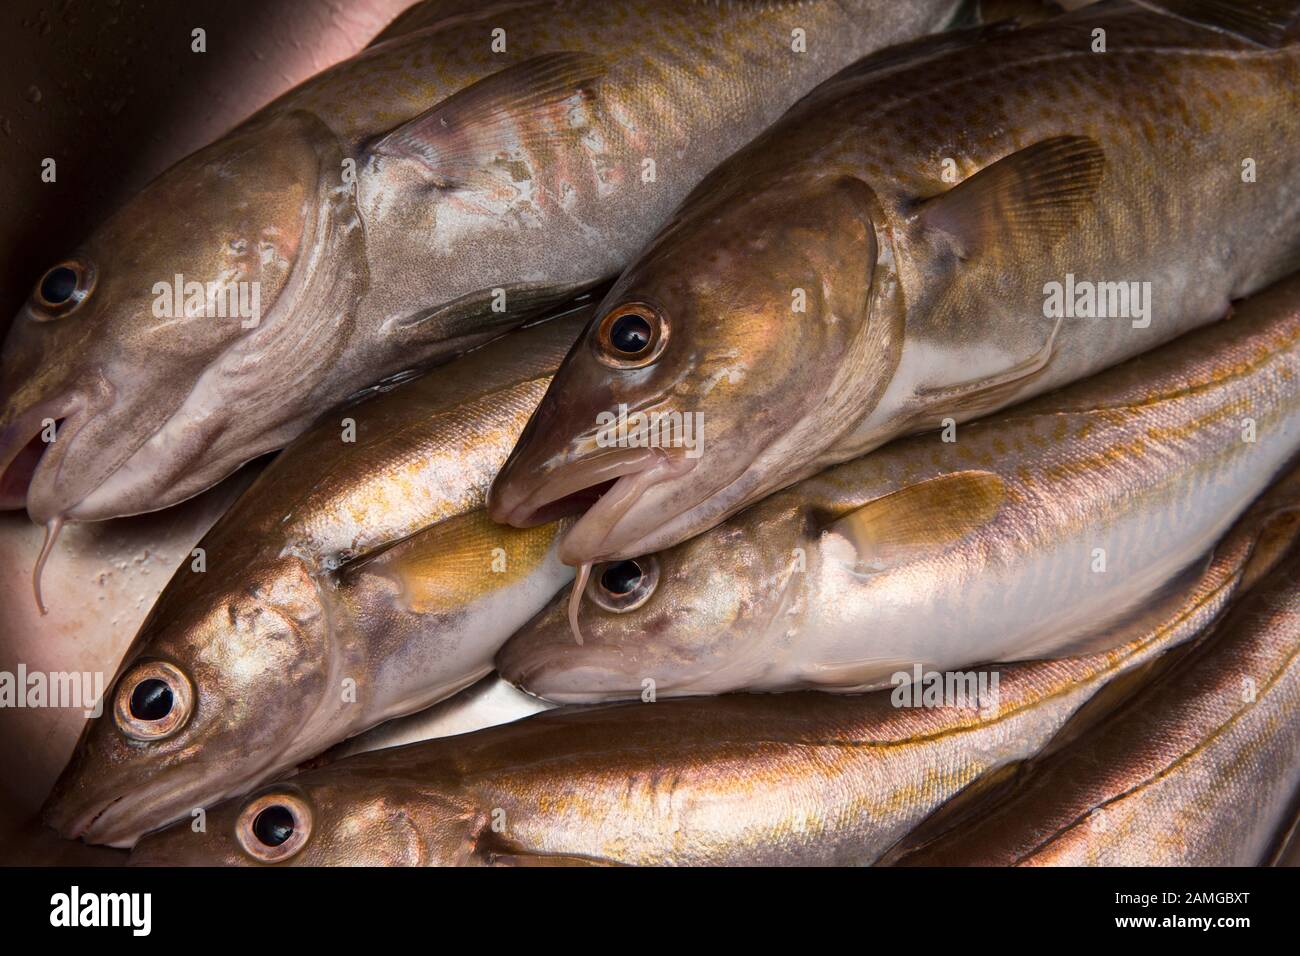 Codling, Gadus morhua, and whiting, Merlangius merlangus, that have been caught on rod and line from Morecambe Bay using a private boat at the end of Stock Photo